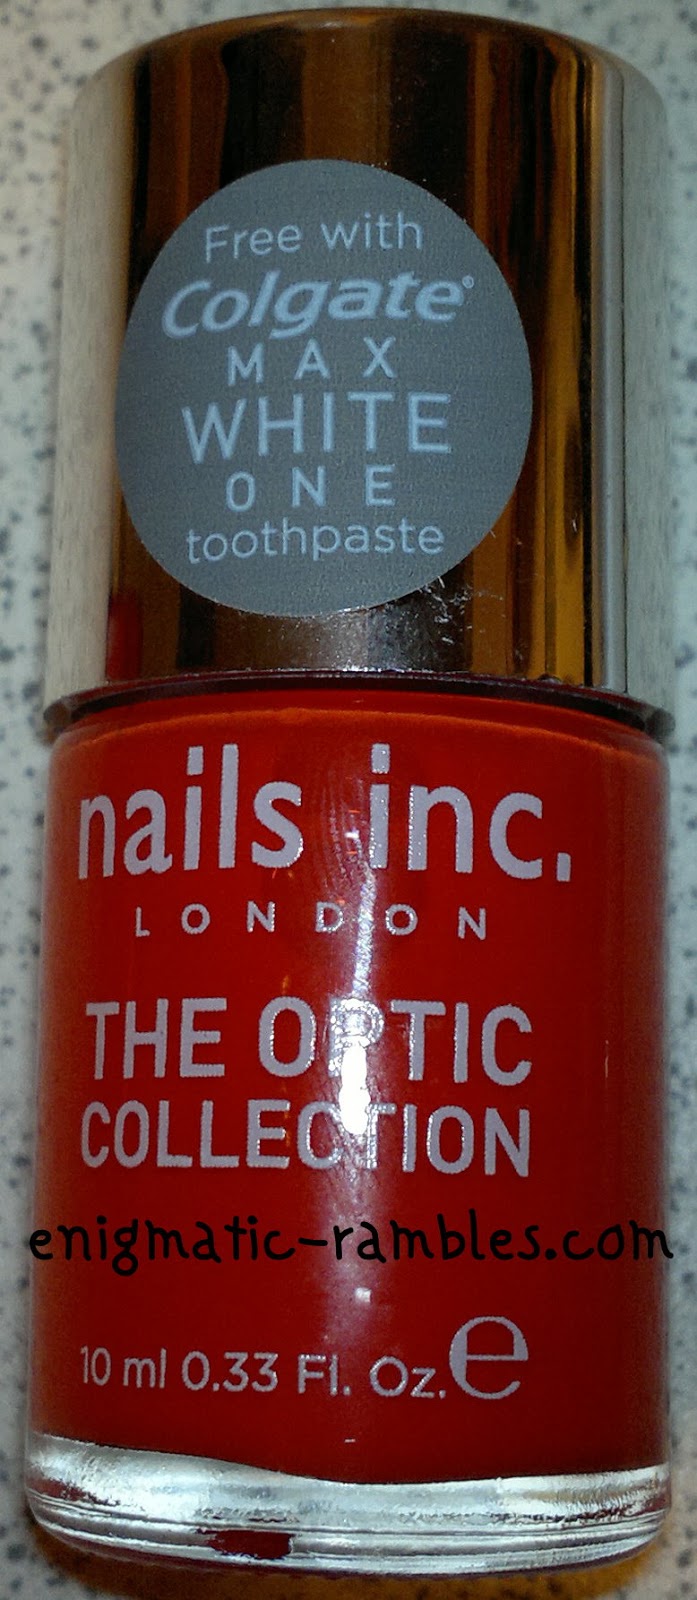 Colgate-Max-White-One-Optic-Toothpaste-Nails-Inc-Optic-Flame-swatch